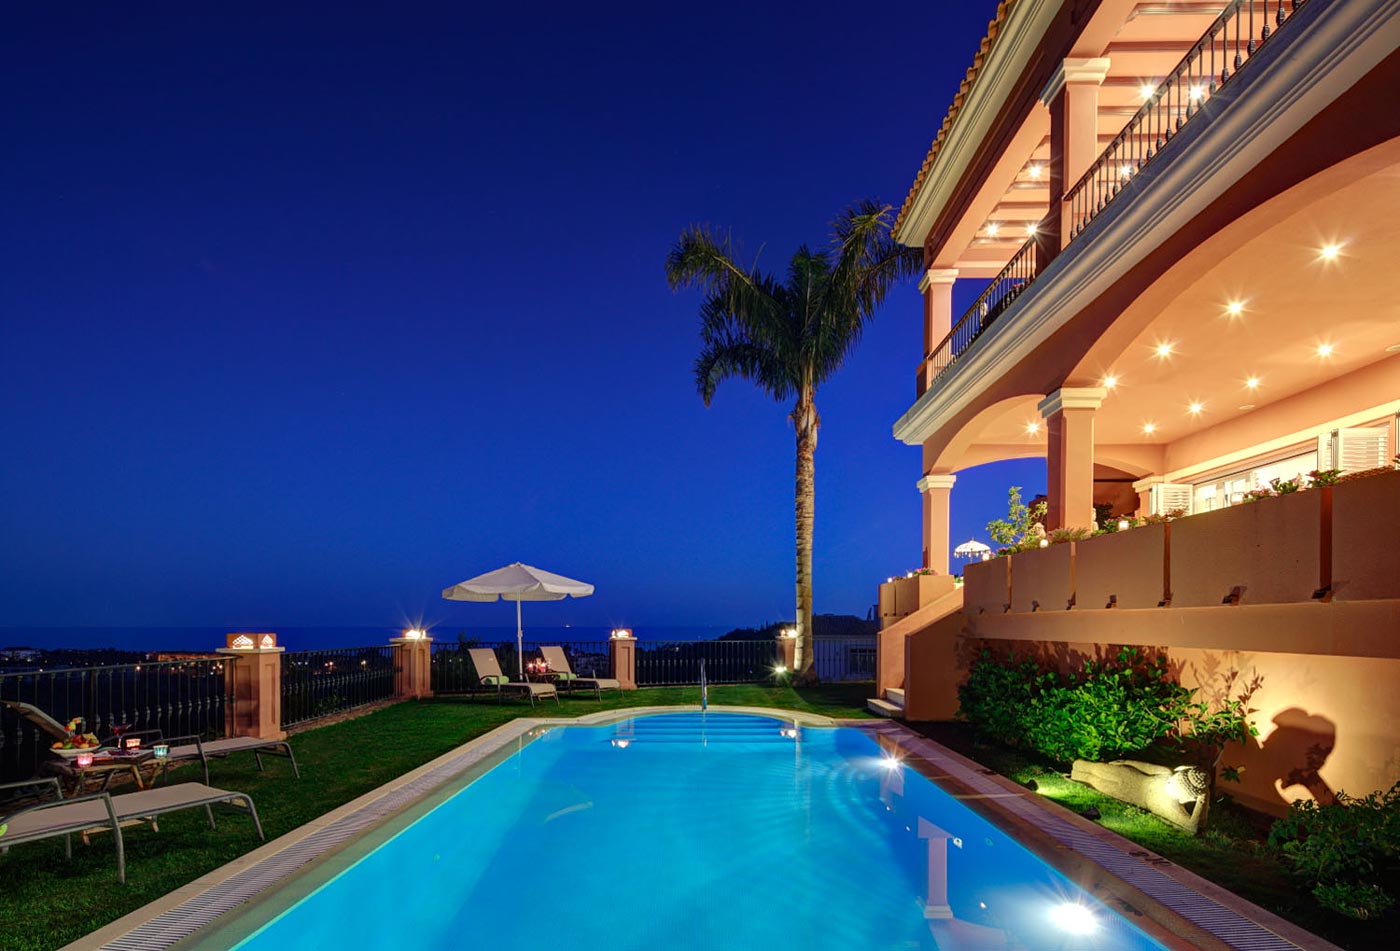 We deliver a car insurance policy with . The Marbella Heights - A luxury villa hotel that combines stunning